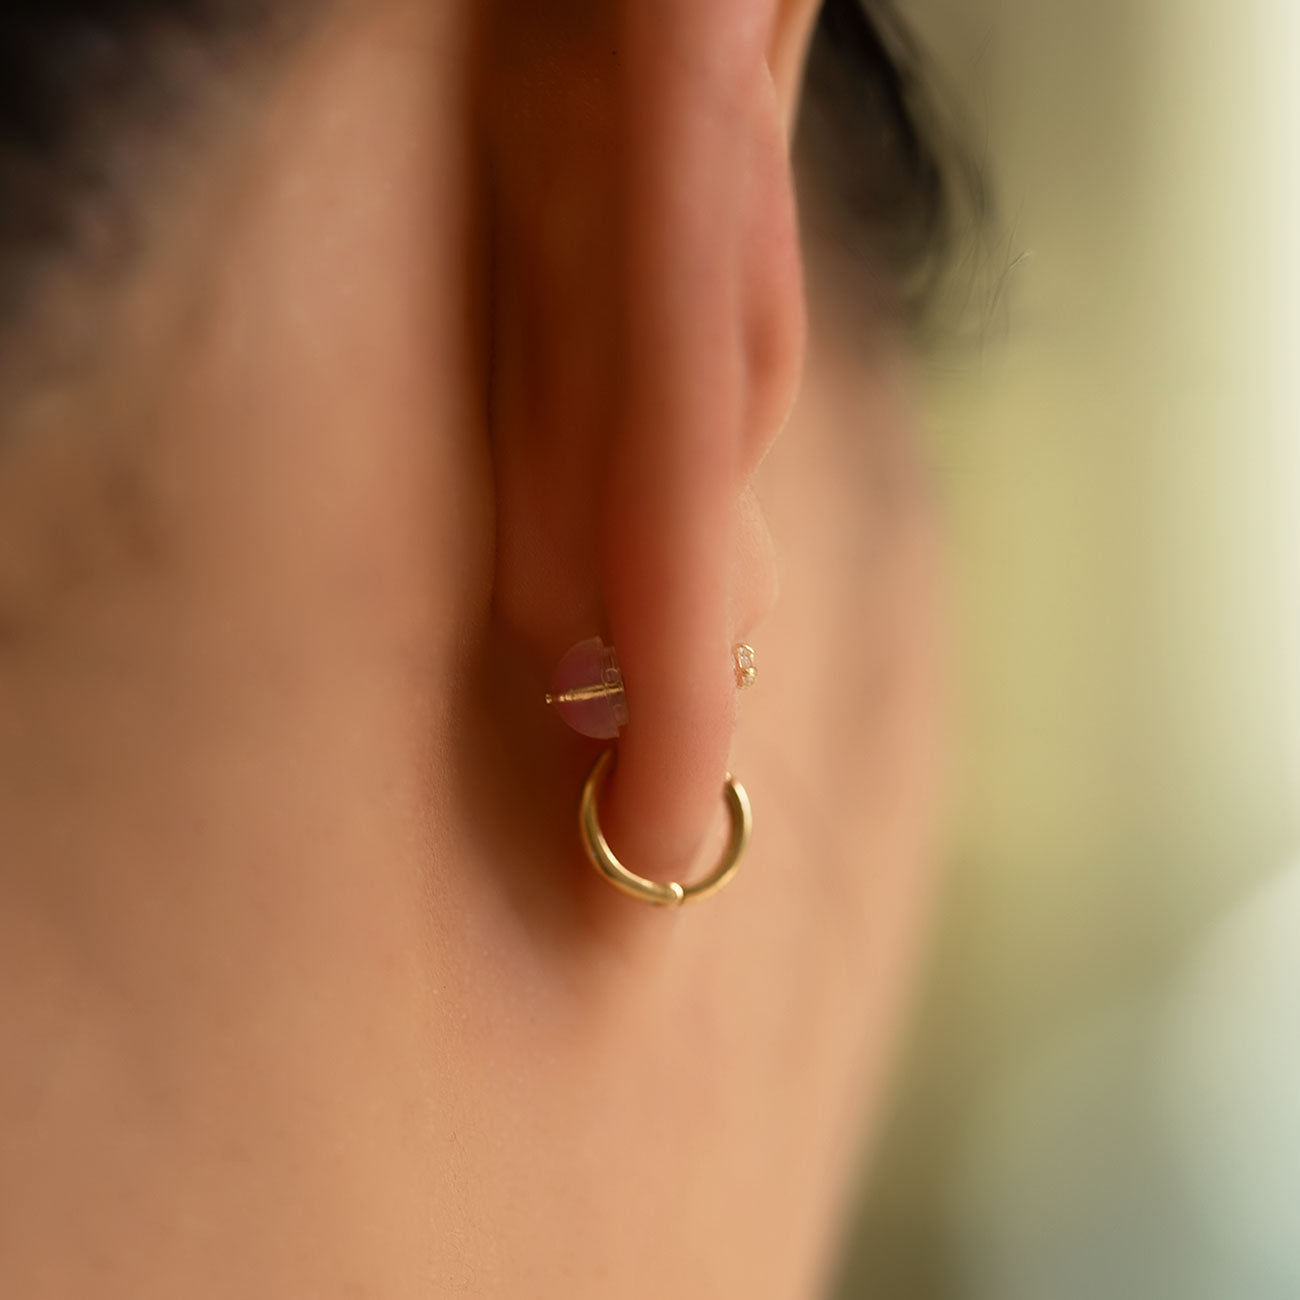 Earring Backings Guide: What are the best earrings backs to buy